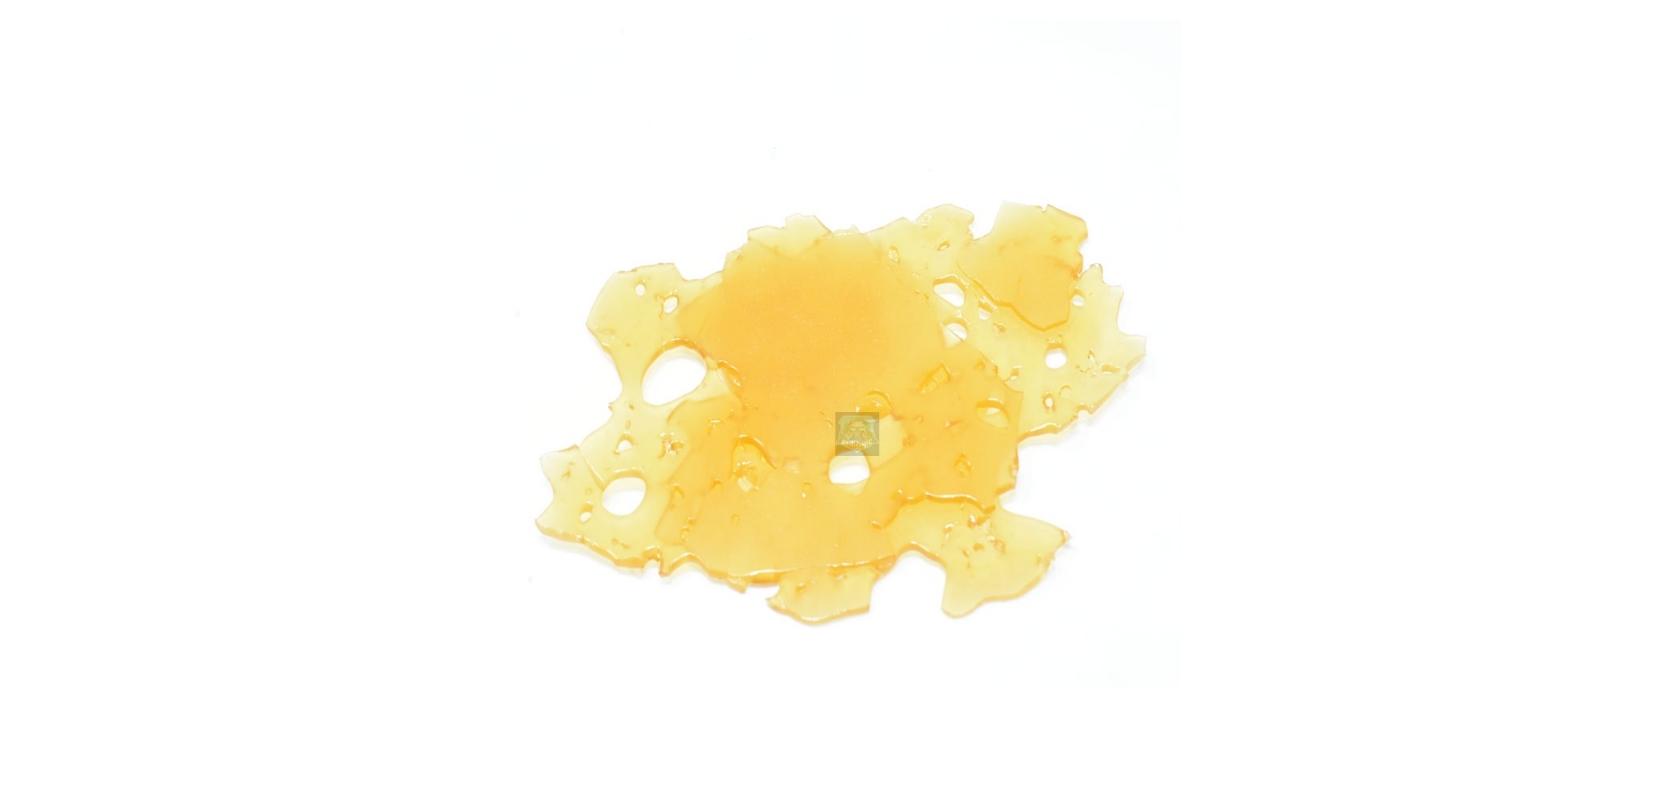 Order a gram of the great Gelato Weed Shatter at our online dispensary now for an incredible $9.99!